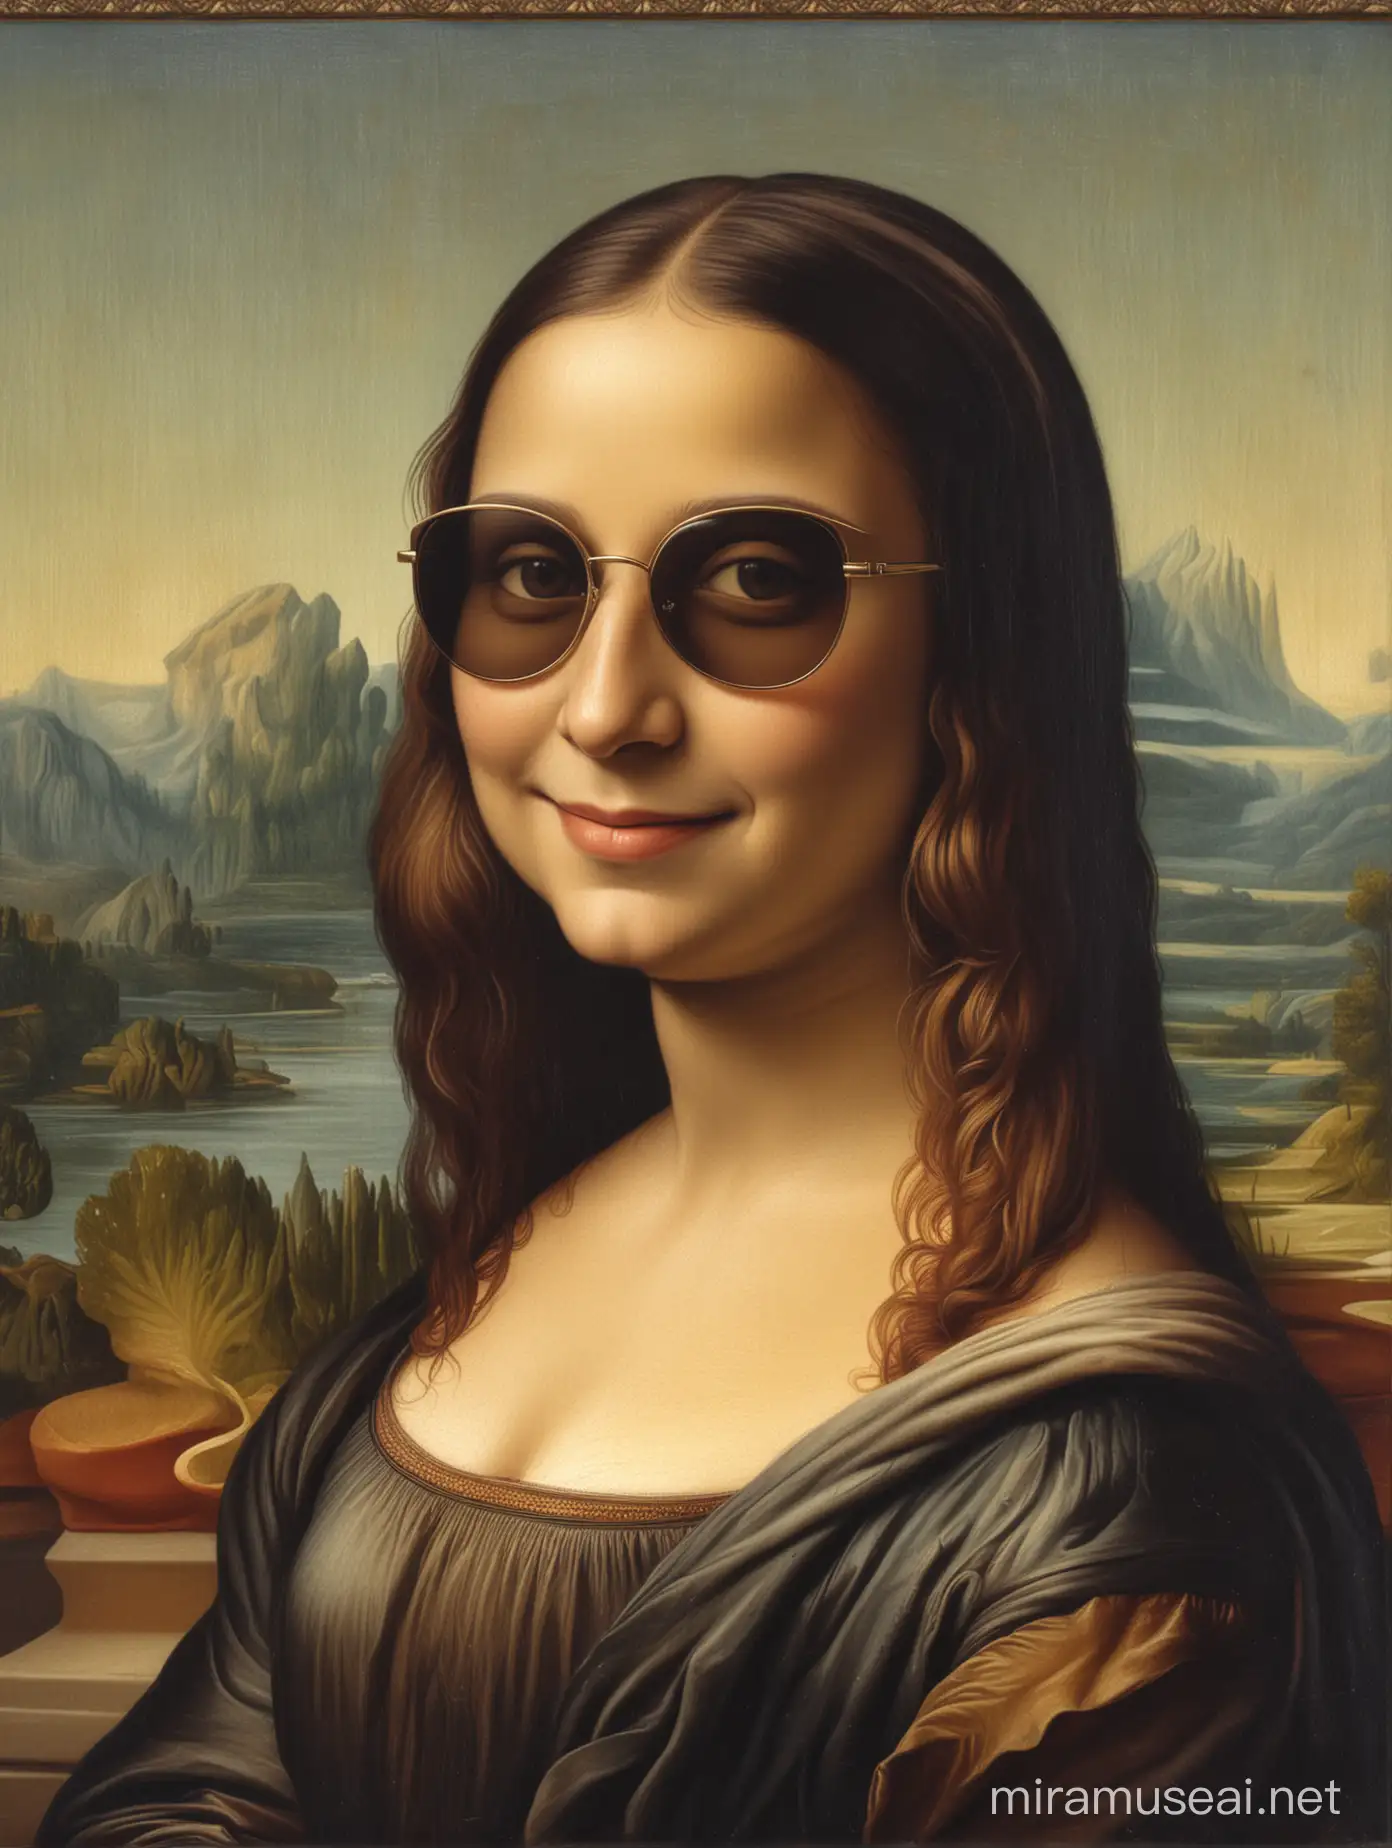 Mona Lisa with a Broad Smile and Sunglasses Modern Twist on a Classic Portrait